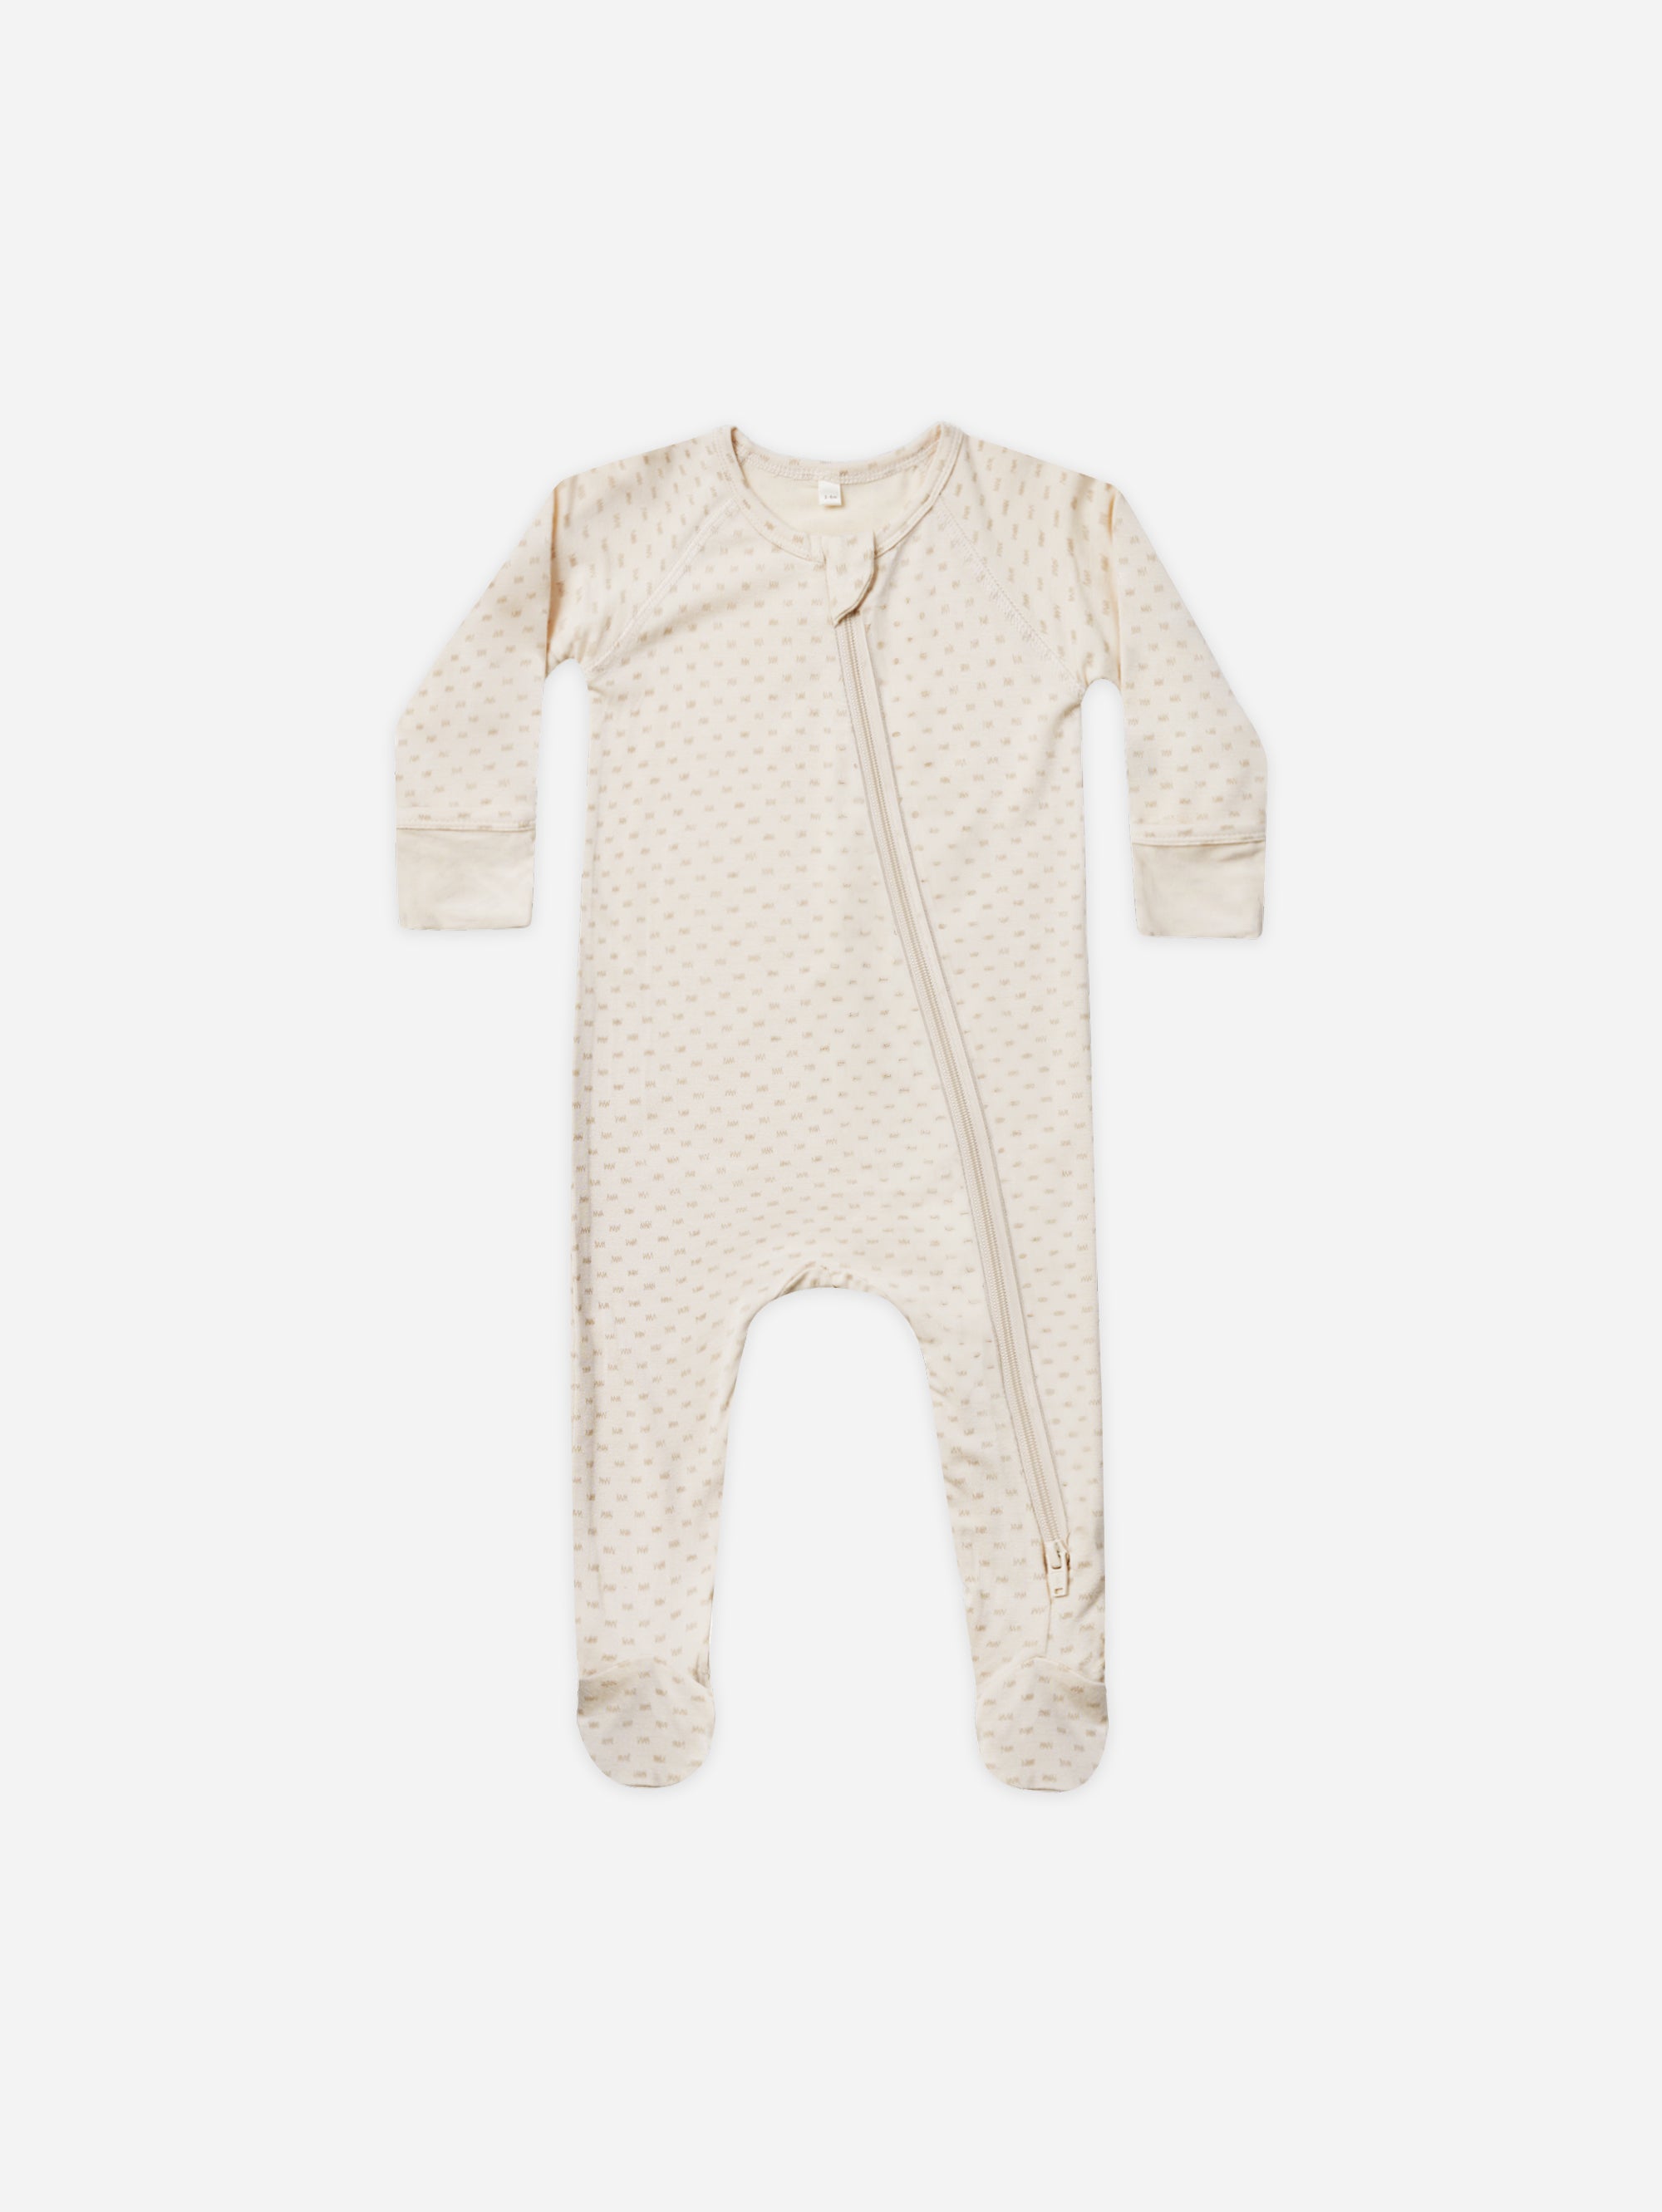 Bamboo Zip Footie || Oat Check - Rylee + Cru | Kids Clothes | Trendy Baby Clothes | Modern Infant Outfits |